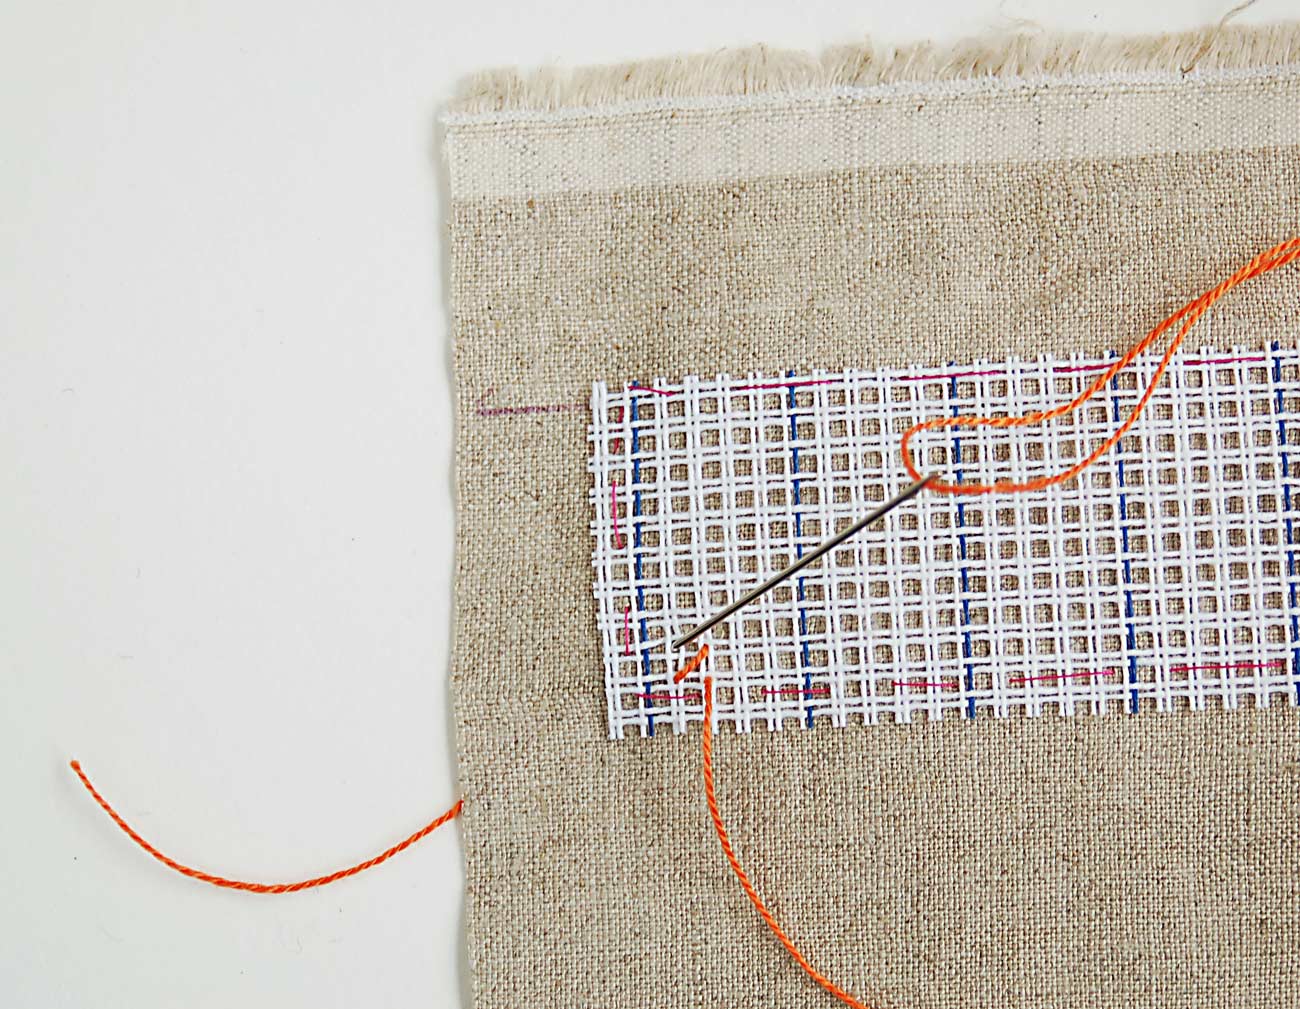 Customizing With Oliver + S: Cross-Stitching With Waste Canvas, Blog